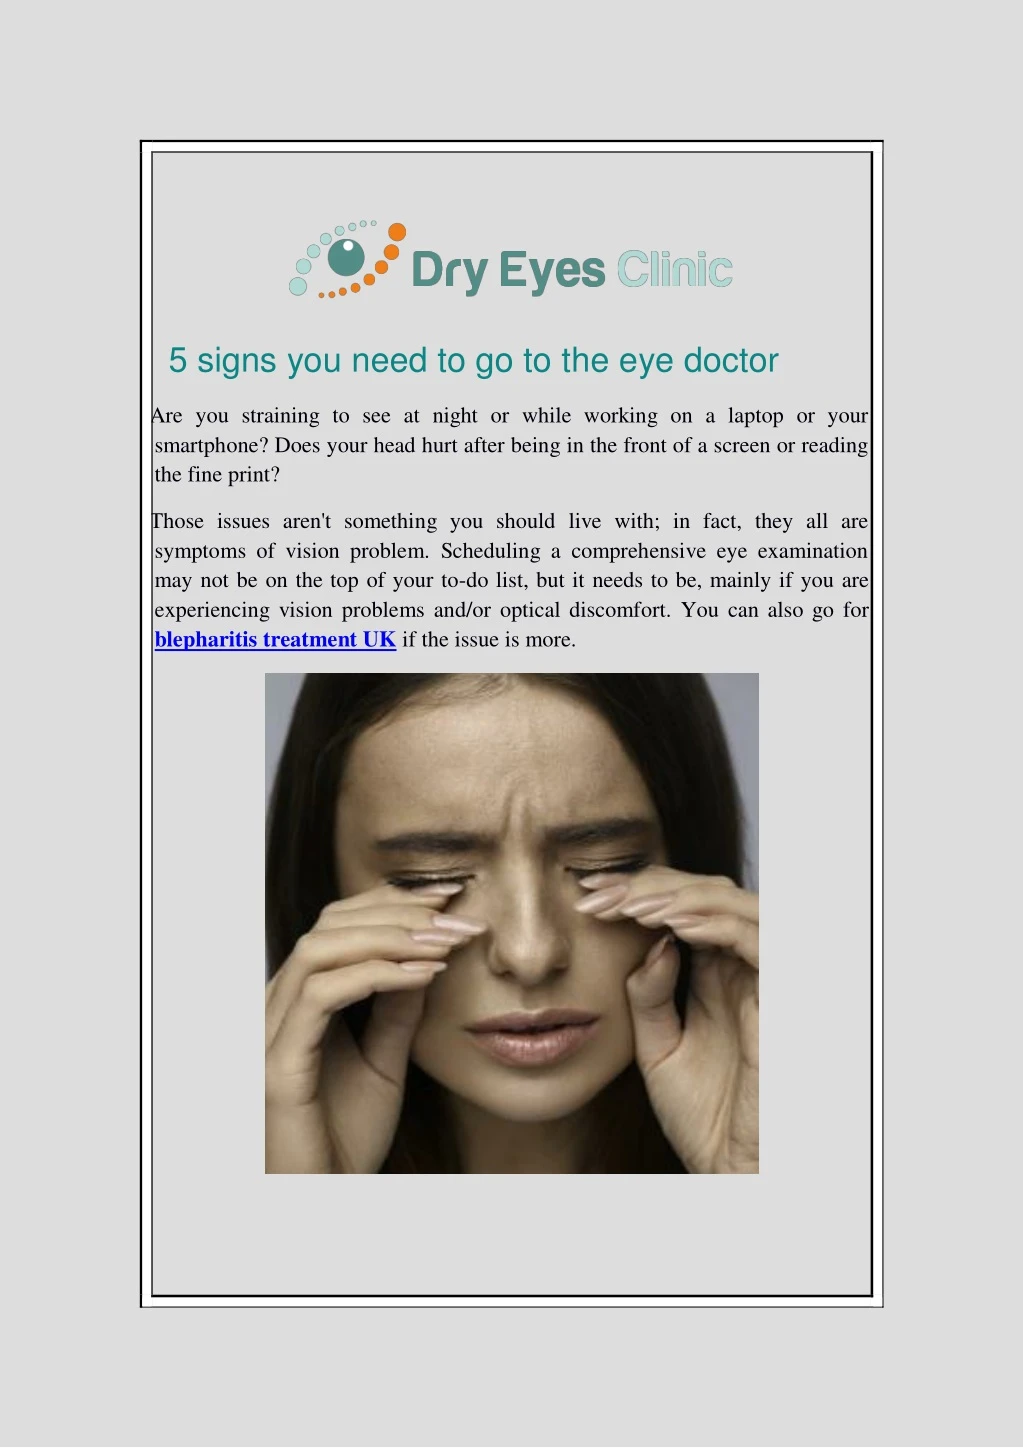 5 signs you need to go to the eye doctor